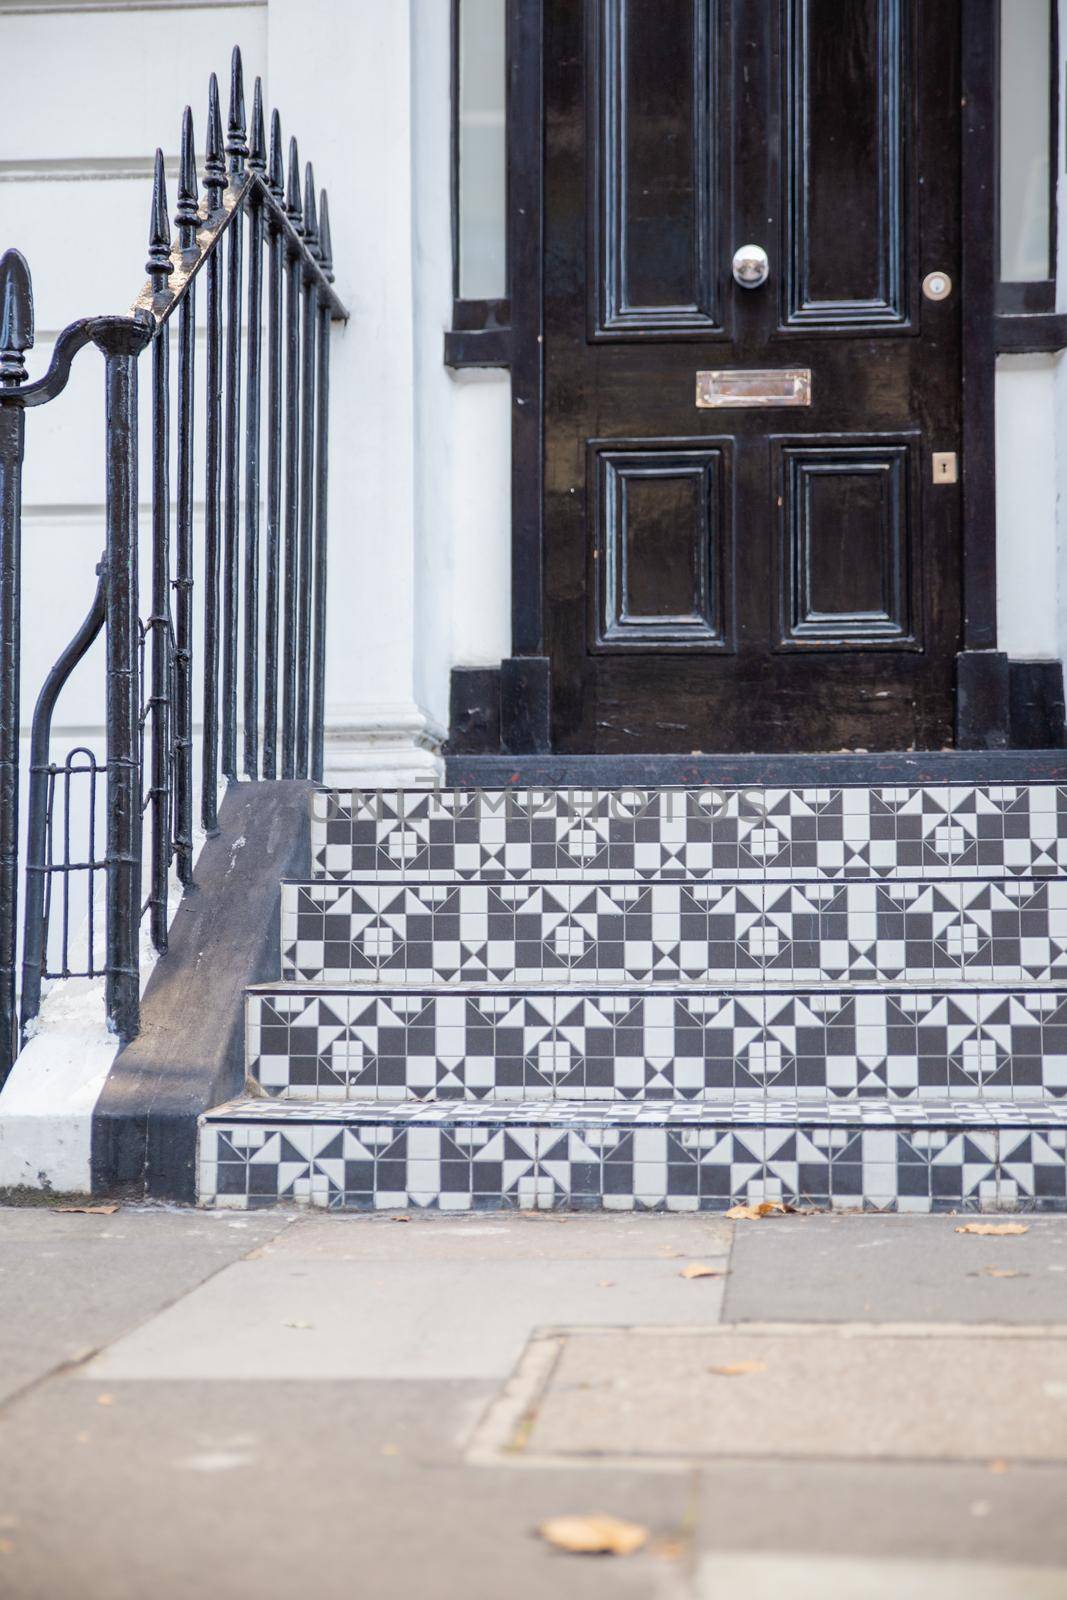 Black and white tiles on the stairs of white British house with black door. Beautiful tiles design on stairs of English house with victorian architecture. Colorful London neighborhood